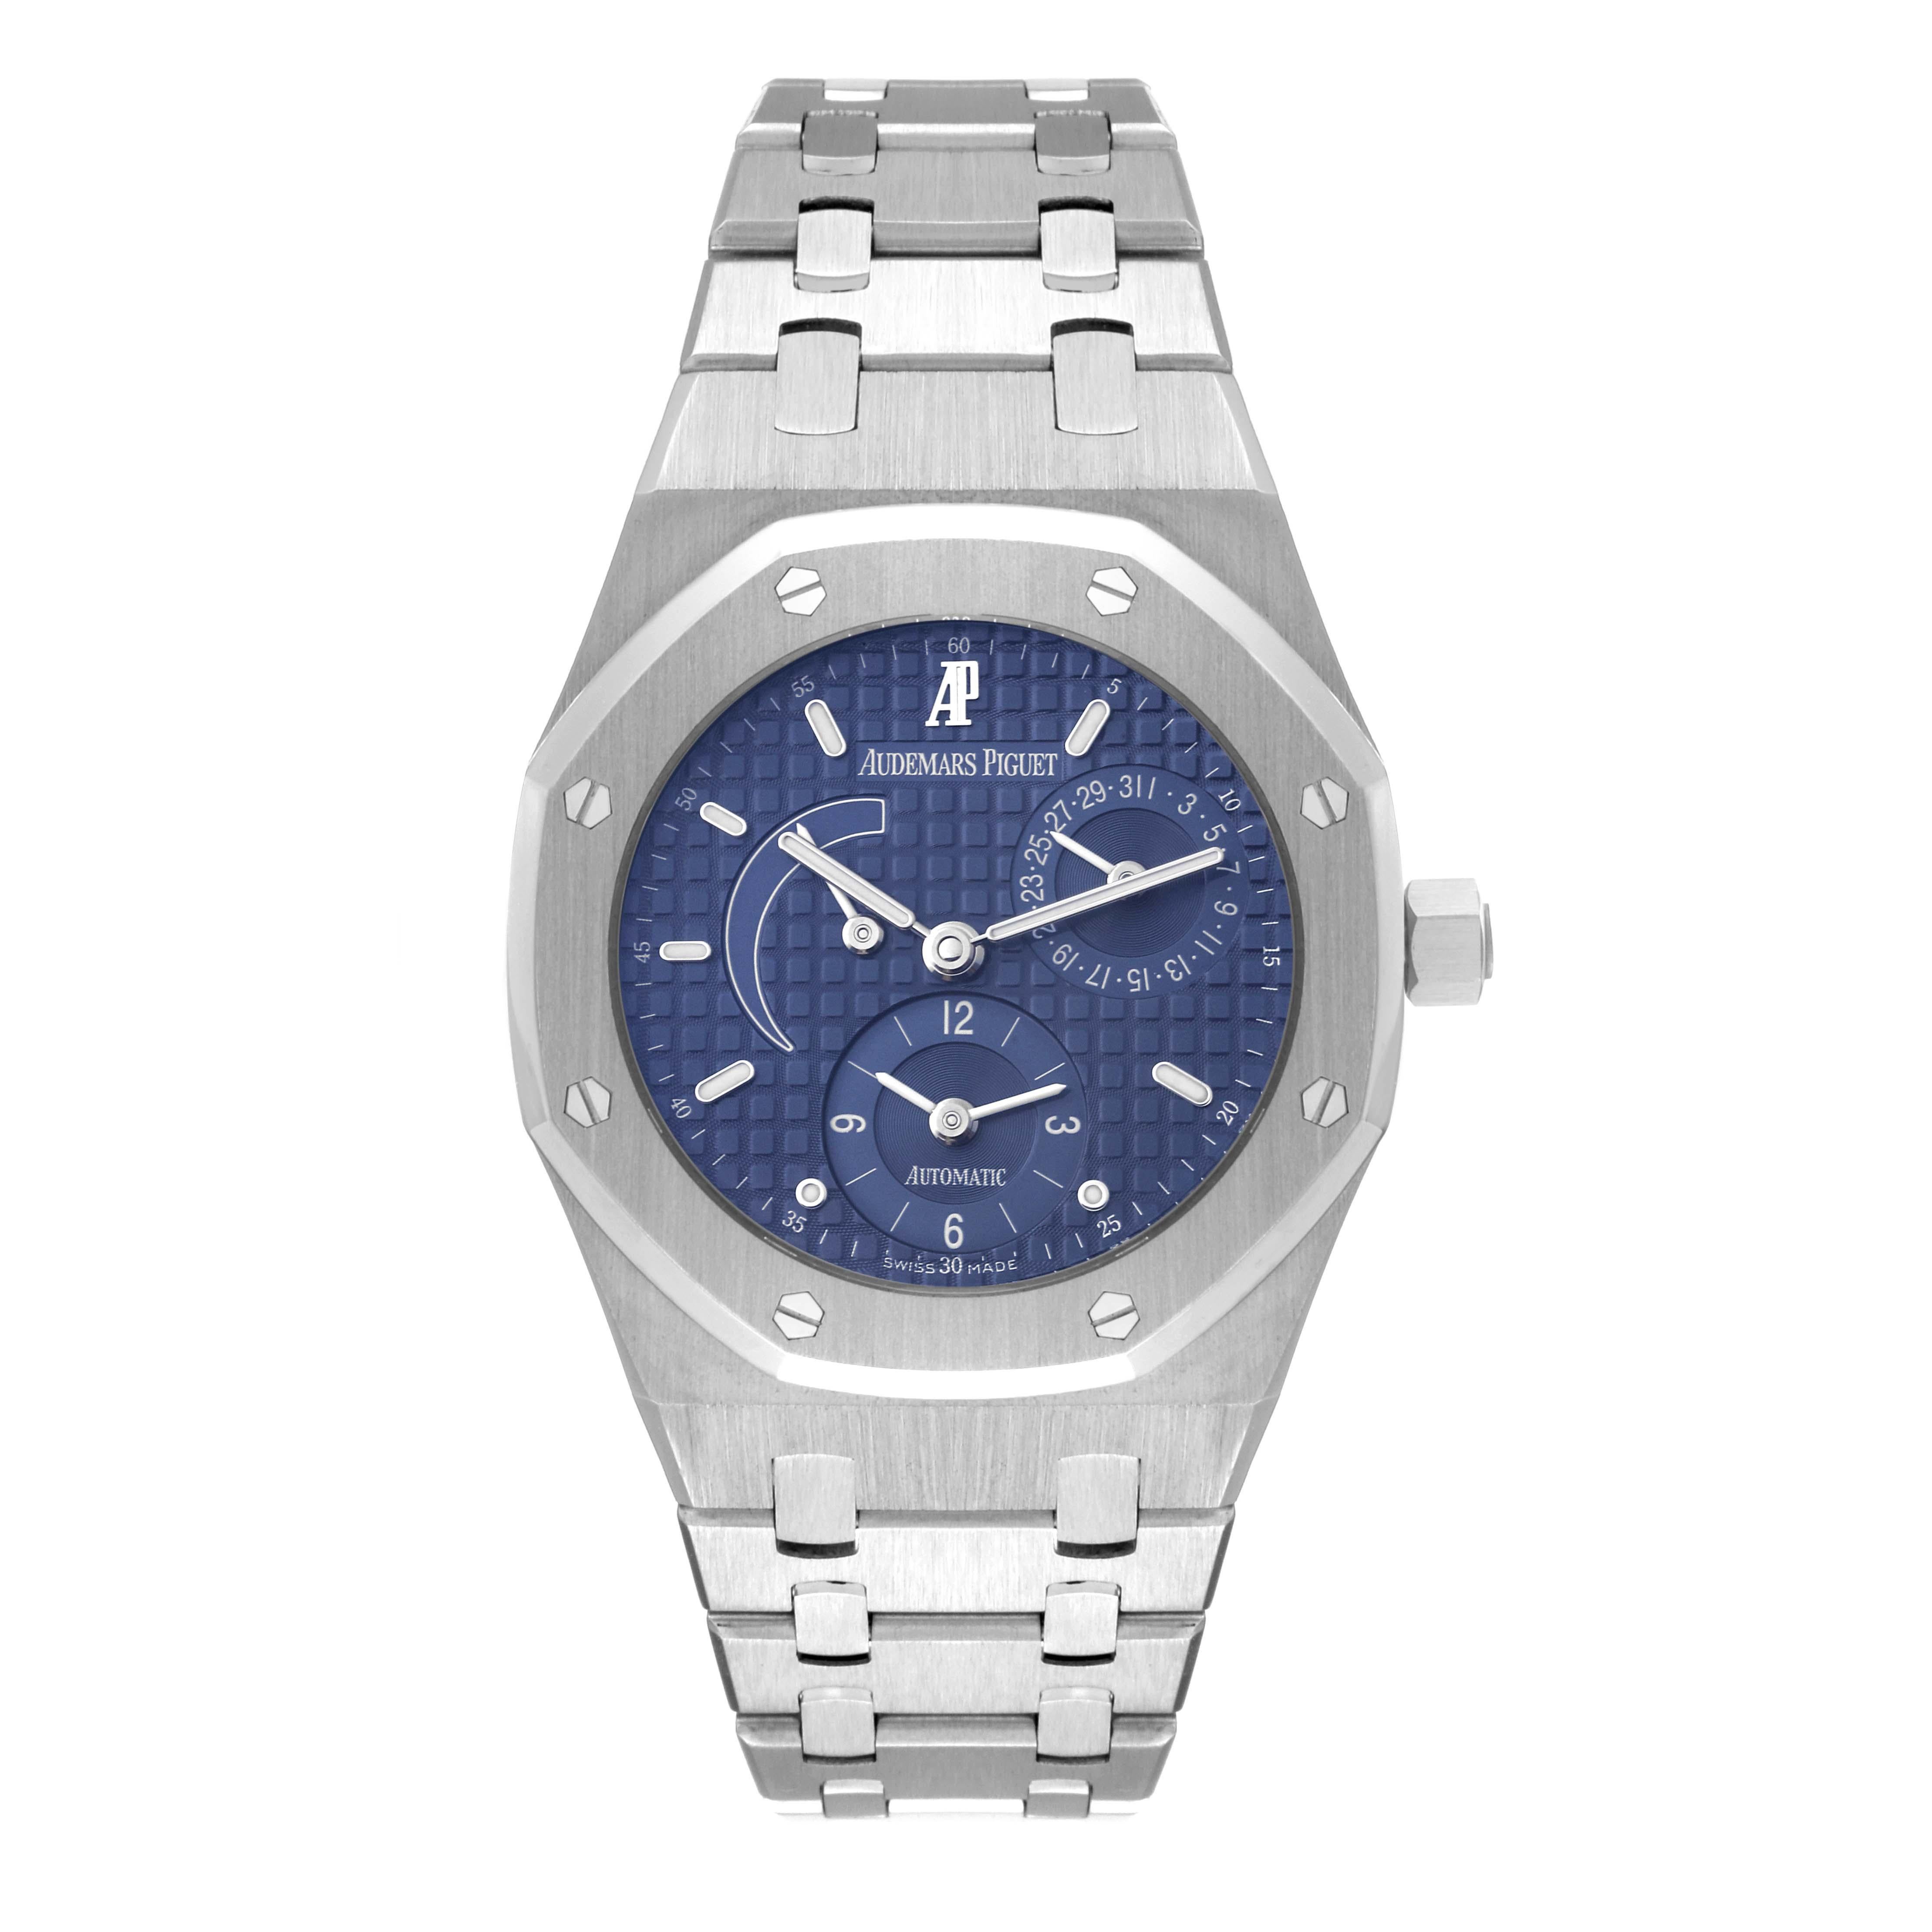 Audemars Piguet Royal Oak Dual Time Power Reserve Steel Mens Watch 25730ST. Automatic self-winding chronograph movement. Stainless octagonal case 36 mm in diameter. Solid case back. Stainless steel bezel punctuated with 8 signature screws. Scratch